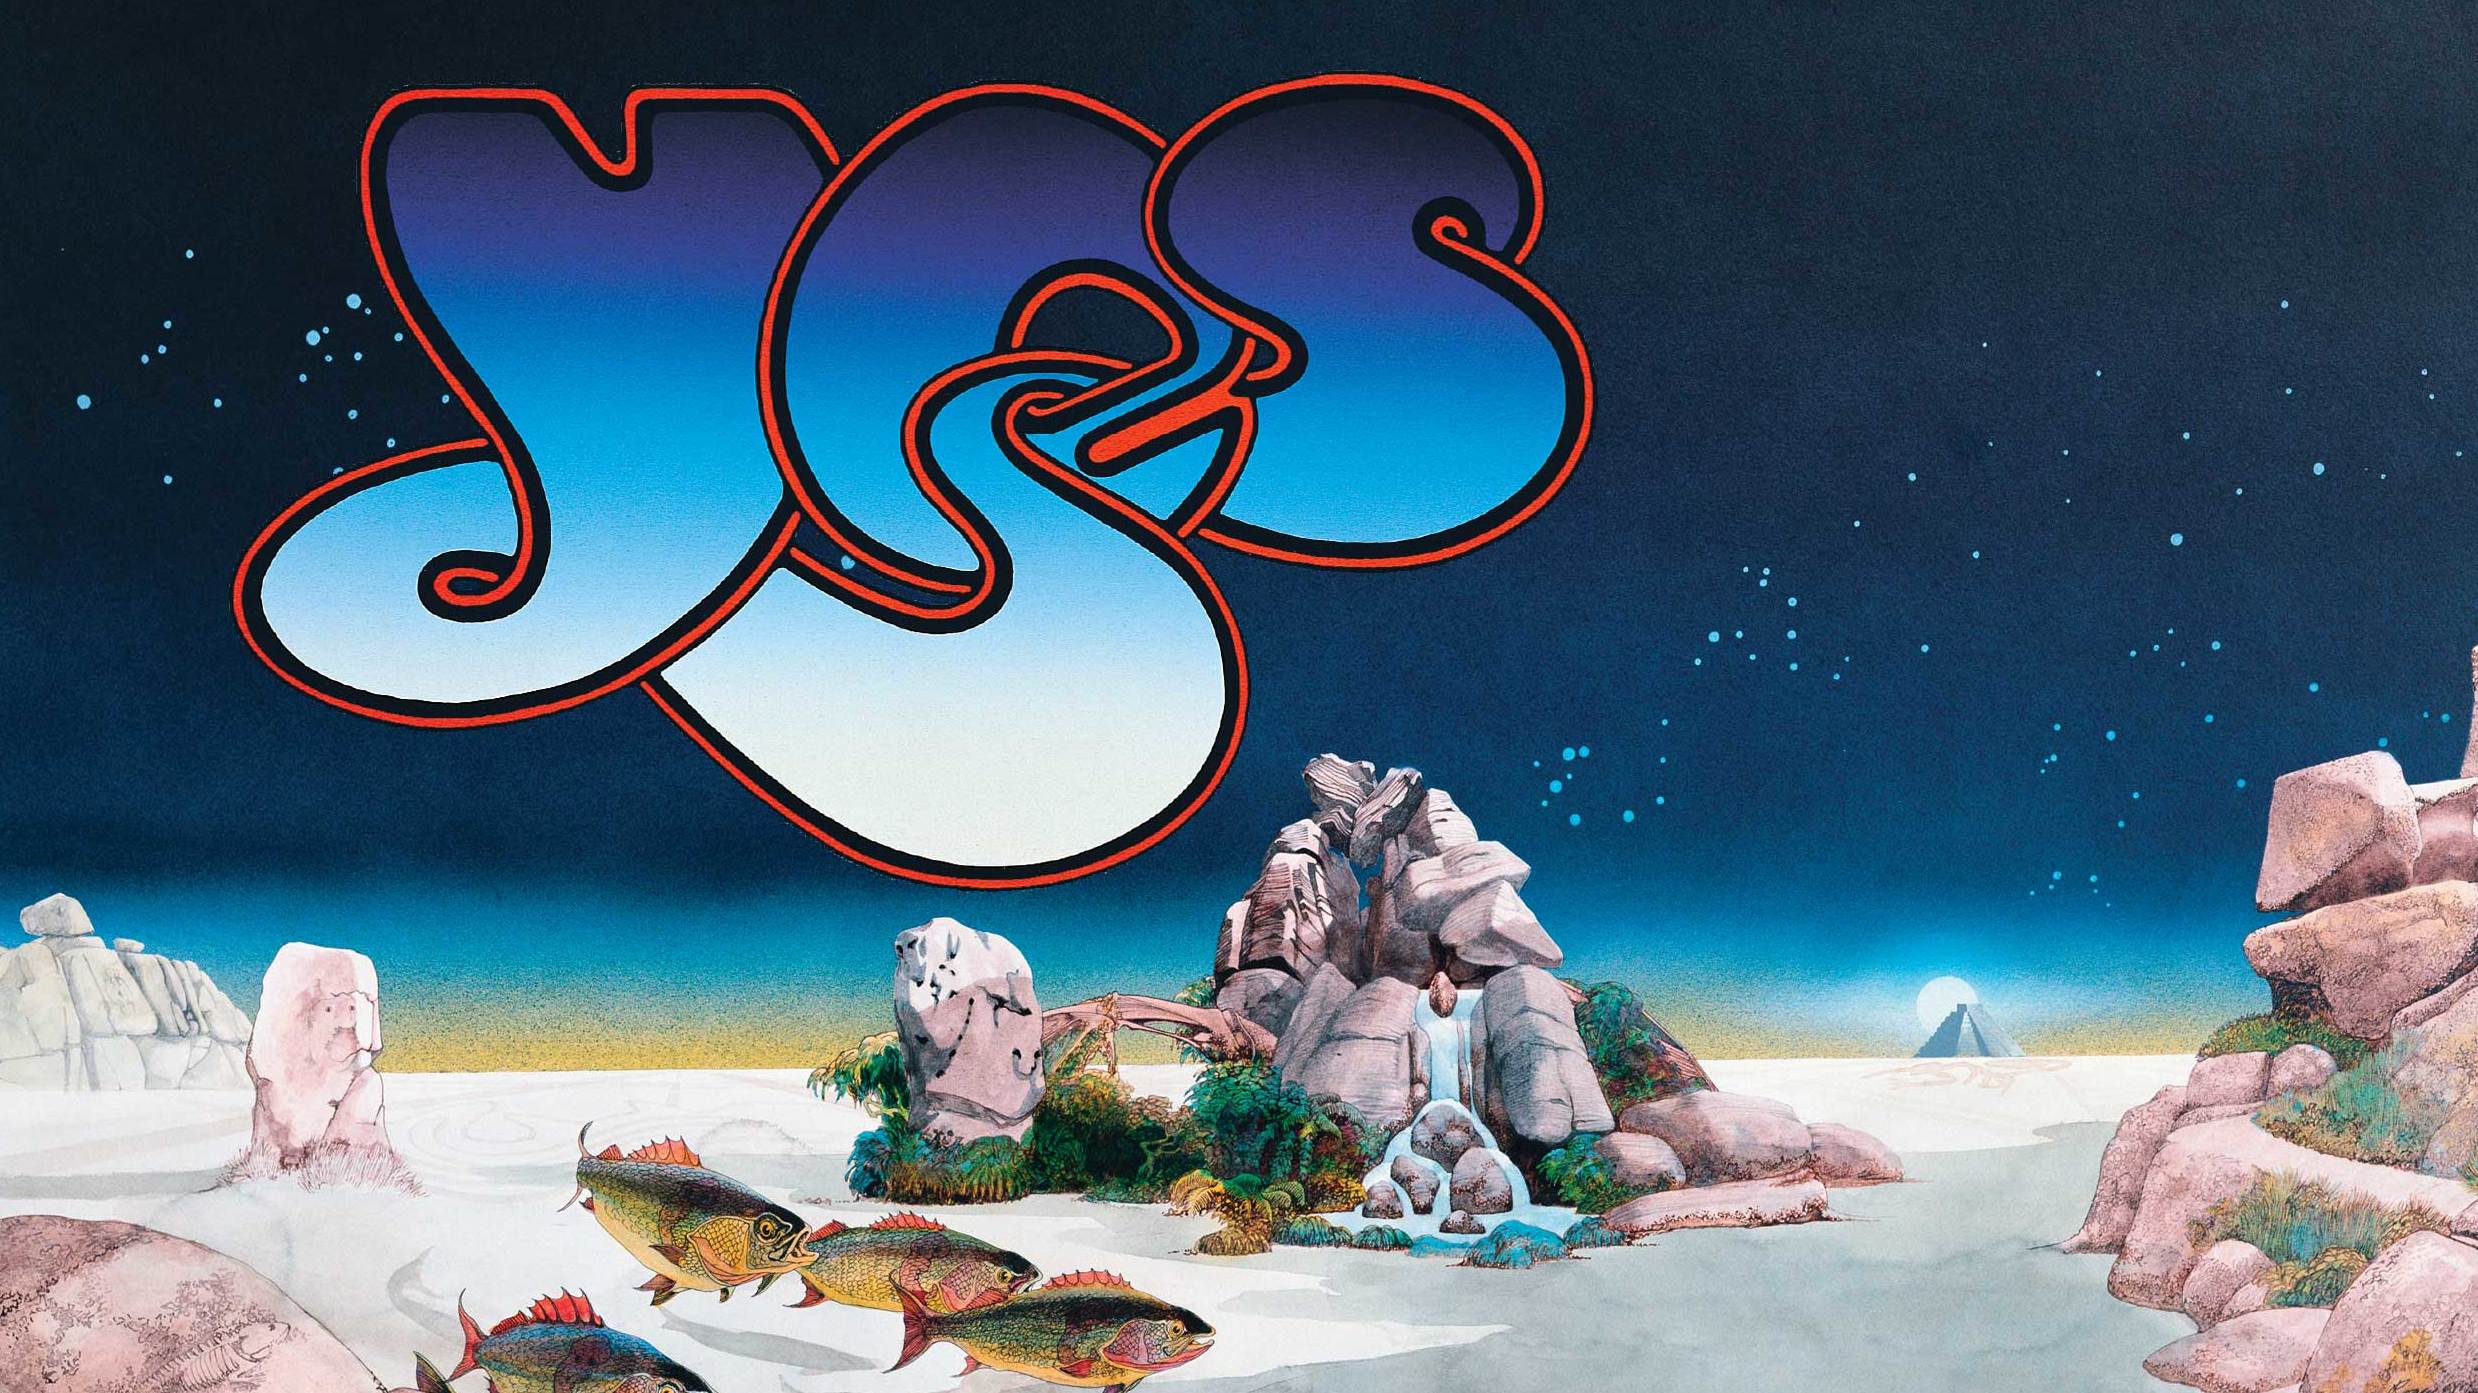 Band: Yes, Tales from the Topographic Ocean